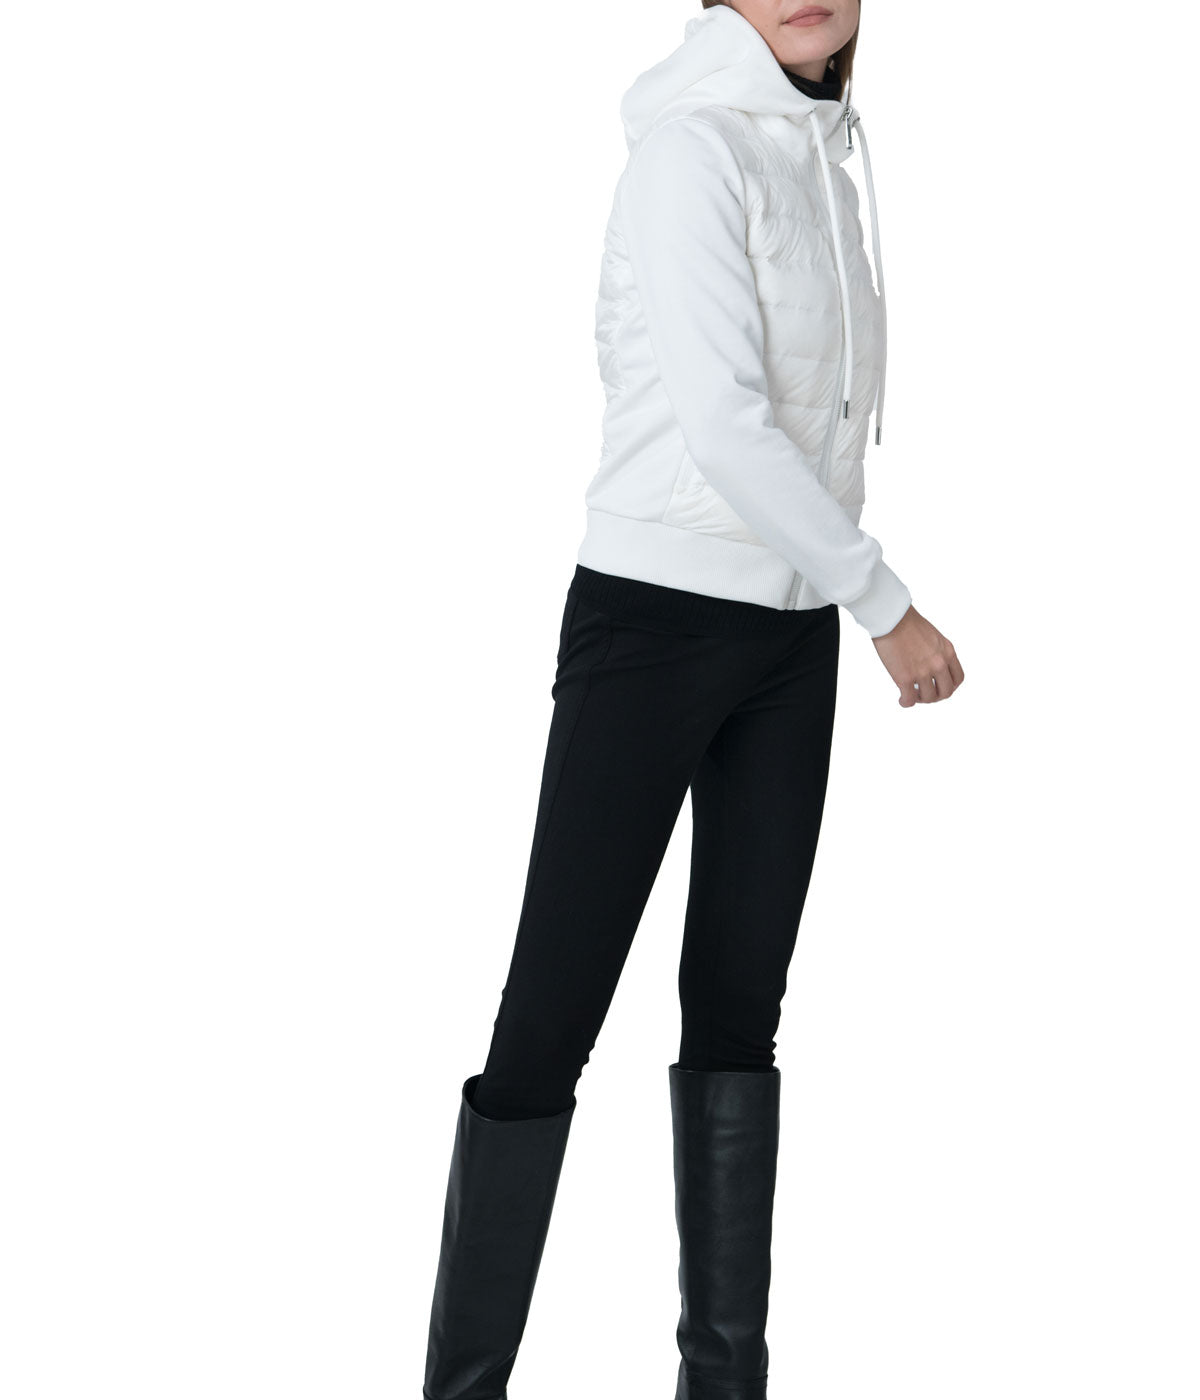 Luna 22" Recycled Nylon And Performance Pique Zip Front Hoodie Jacket White